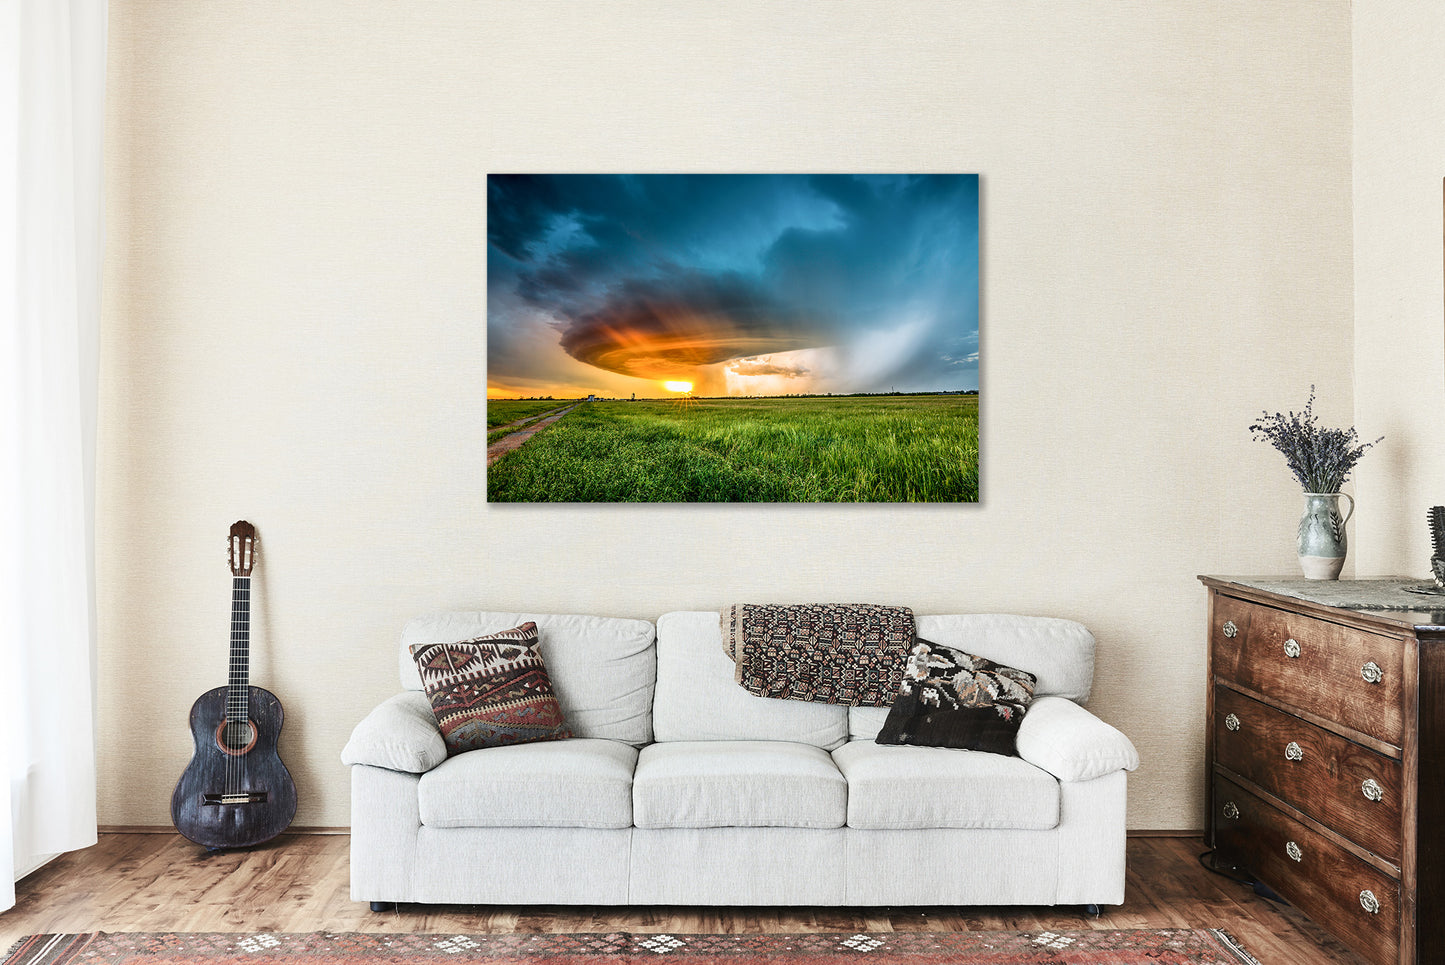 Storm Metal Print (Ready to Hang) Photo on Aluminum of Supercell Thunderstorm Illuminated by Sunlight at Sunset in Oklahoma Weather Wall Art Nature Decor